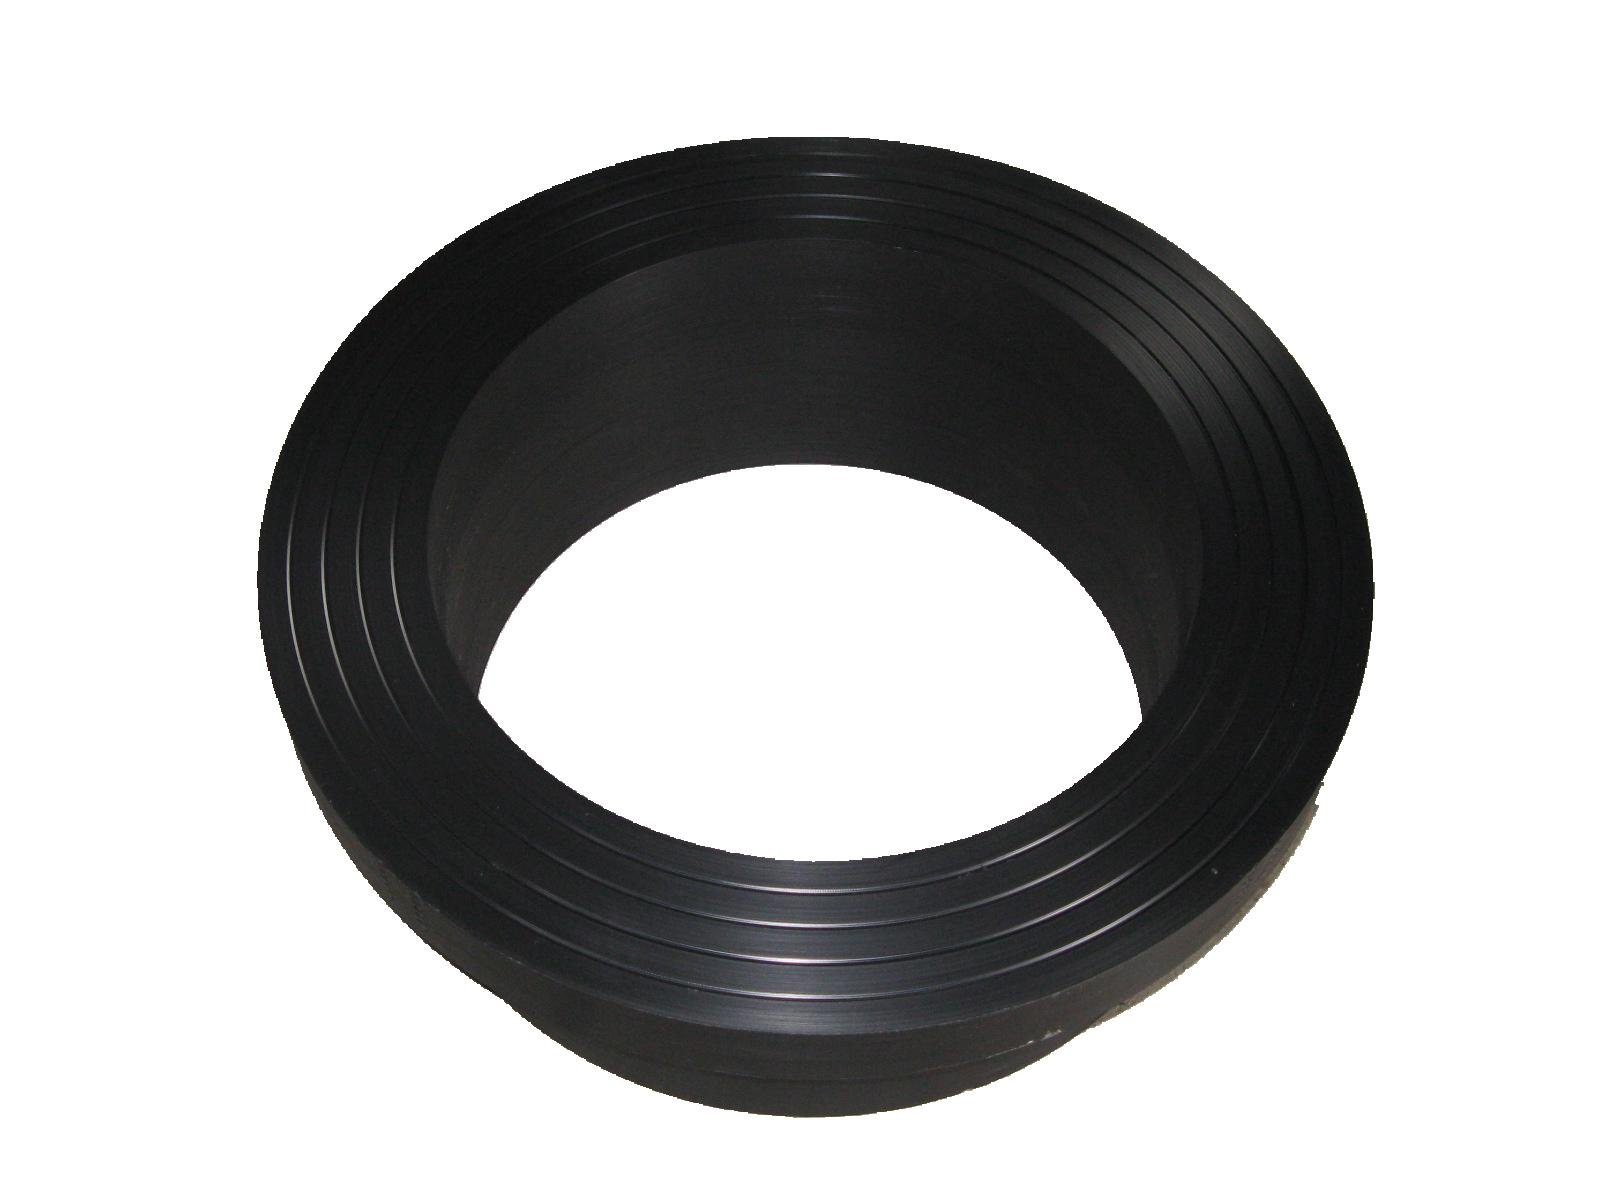 HDPE large diameter and high pressure flange 5